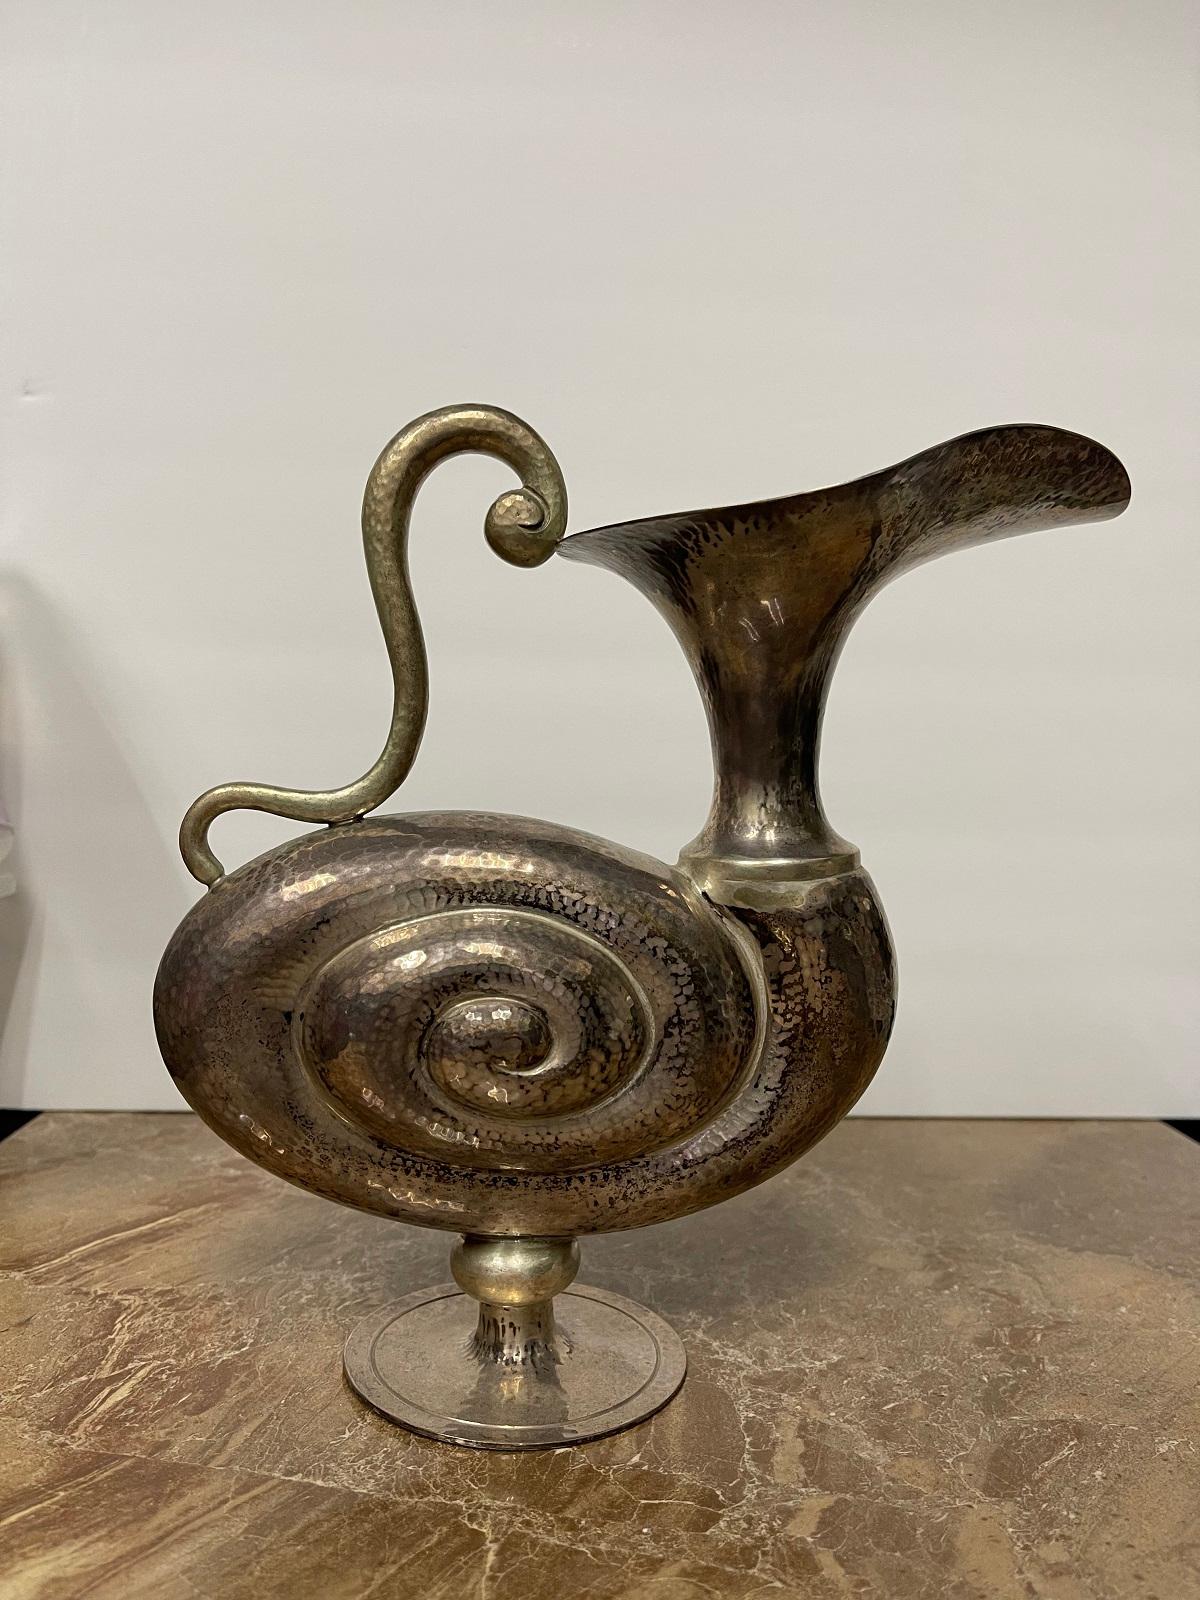 Vintage and unique Pampaloni Bichierografia  – “snail” pitcher in sterling silver. 
Large size pitcher - height 8.25 inches and width 7 inches.
Retail price: $3,900
Our price: $1,900
Pre-owned.
Before shipment, we will include final cleaning and